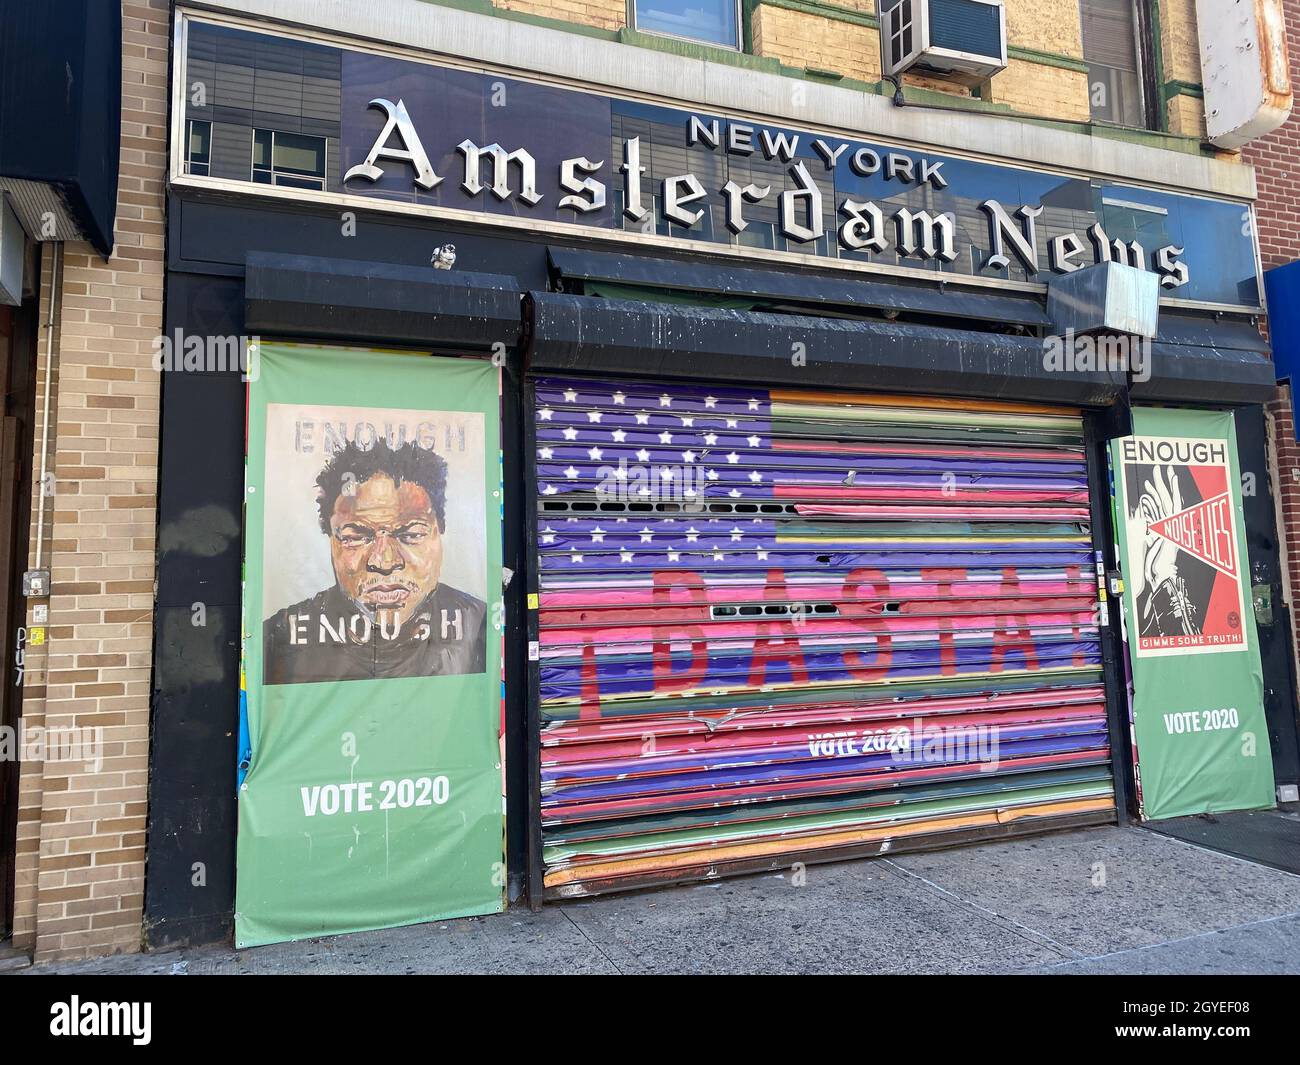 Amsterdam News Building, on Frederick Douglas Blvd in Harlem, the oldest Black newspaper in the country that offers the 'New Black View' within local, national and international news for the Black community. New York City. Stock Photo